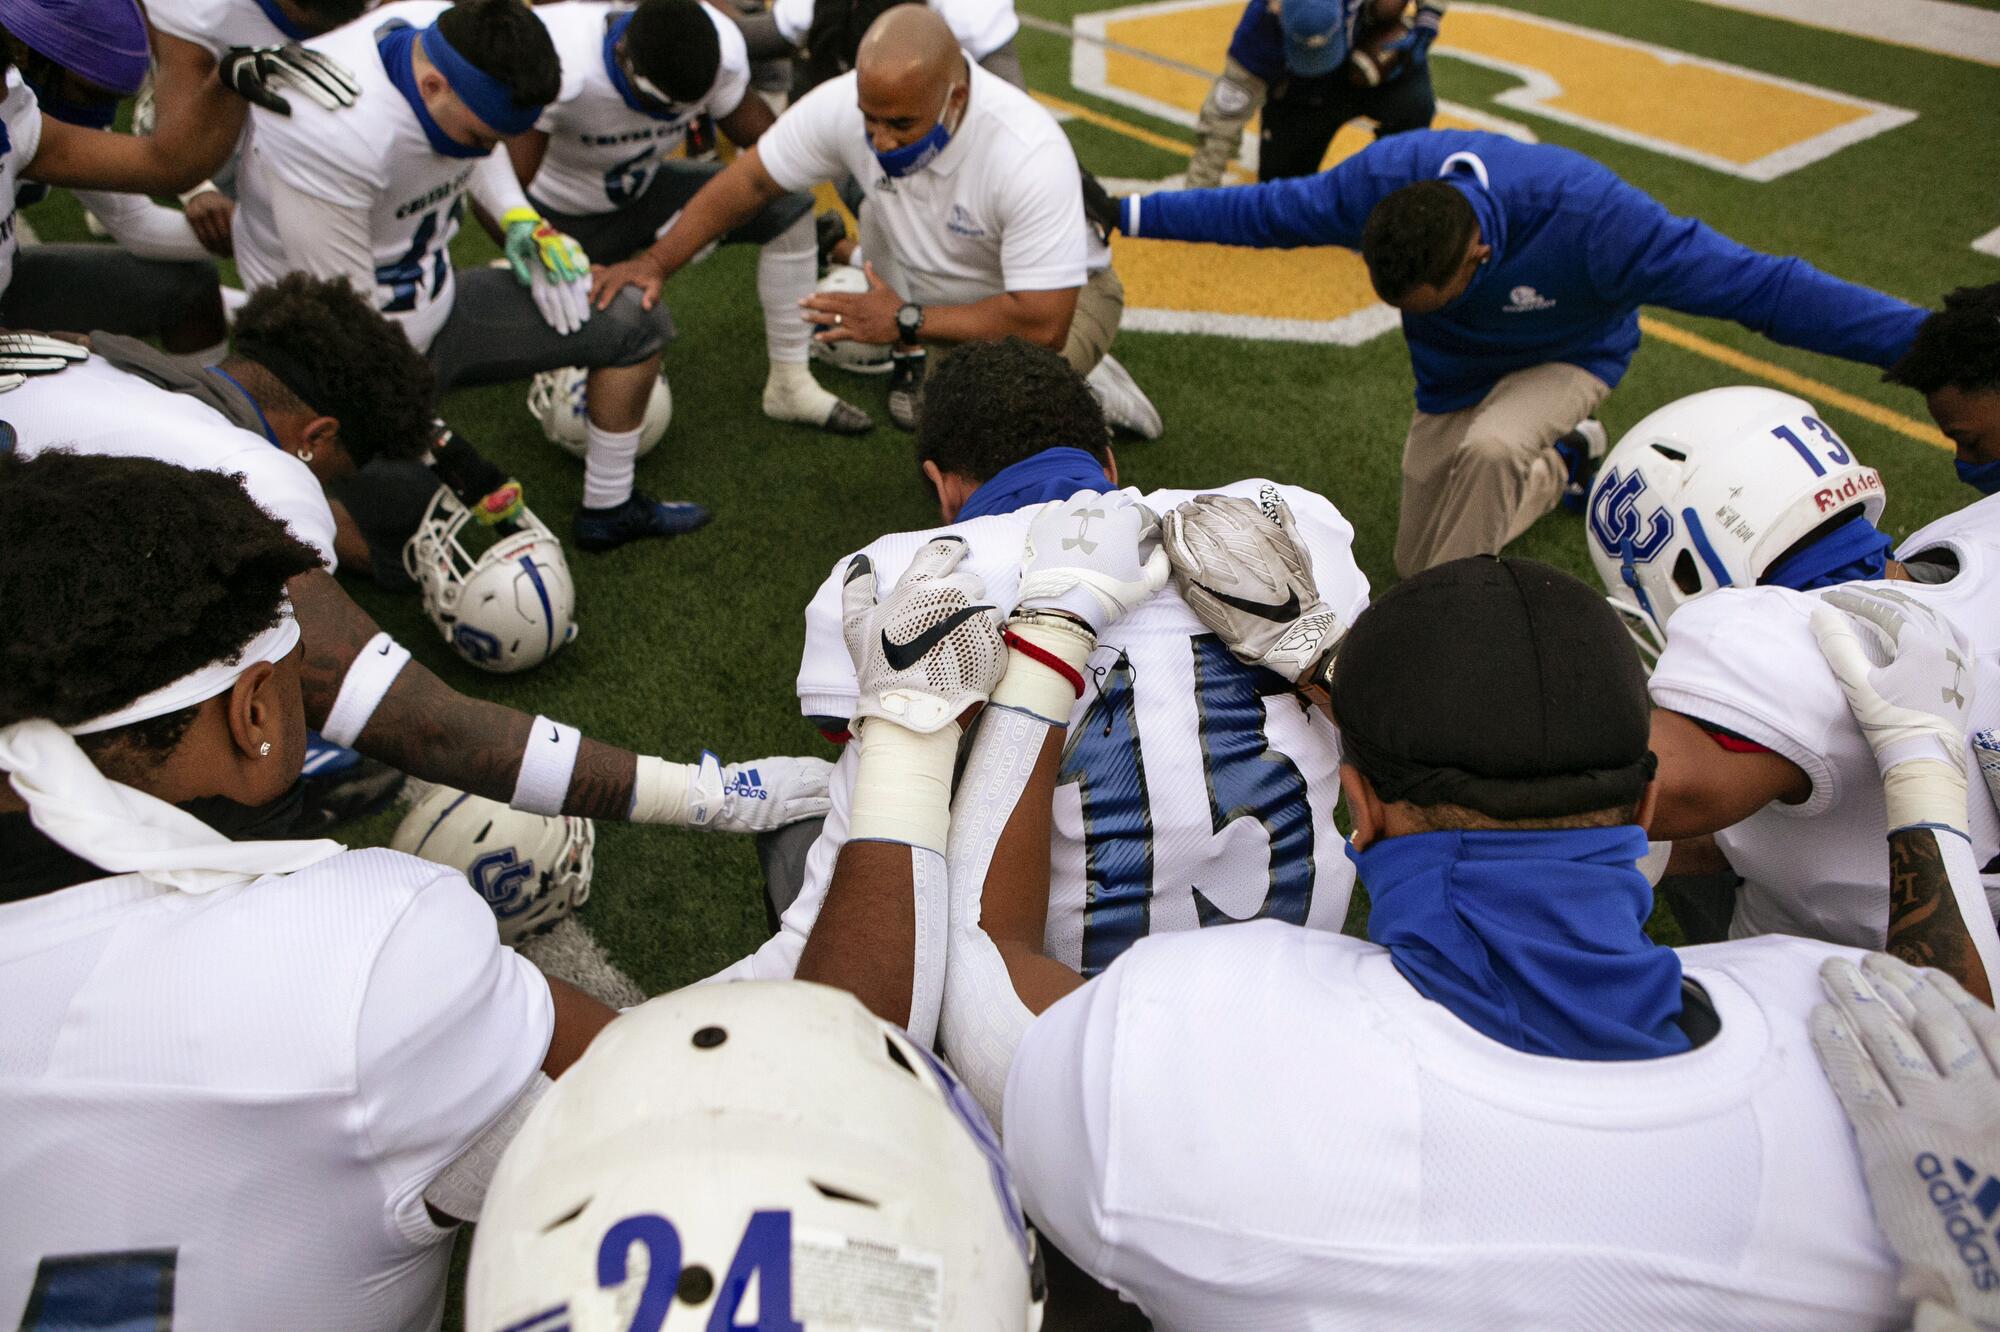 Culver City head football coach Jahmal Wright kneels with his team leading them in prayer.